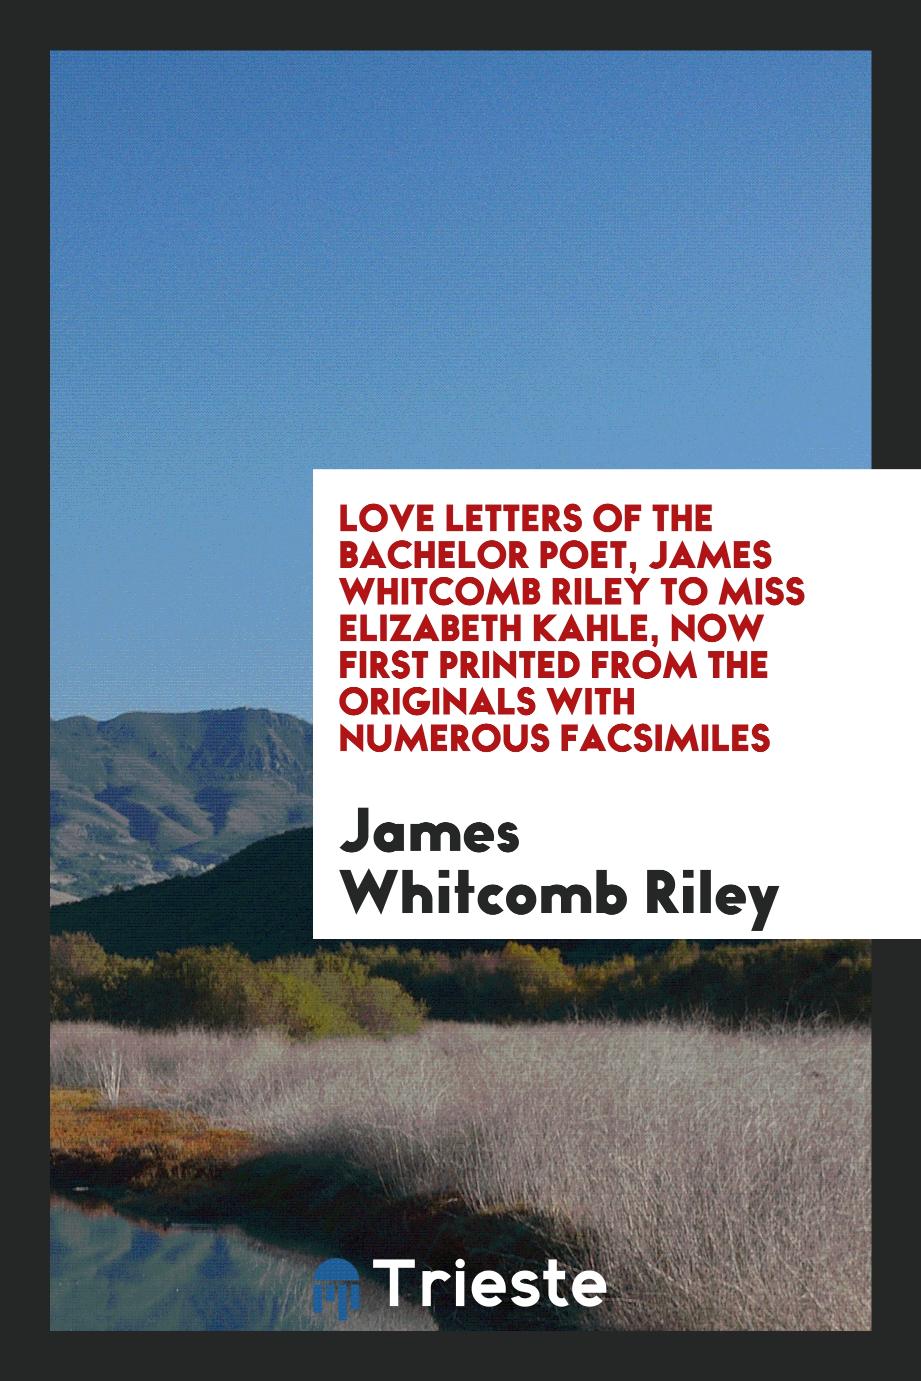 Love letters of the bachelor poet, James Whitcomb Riley to Miss Elizabeth Kahle, now first printed from the originals with numerous facsimiles